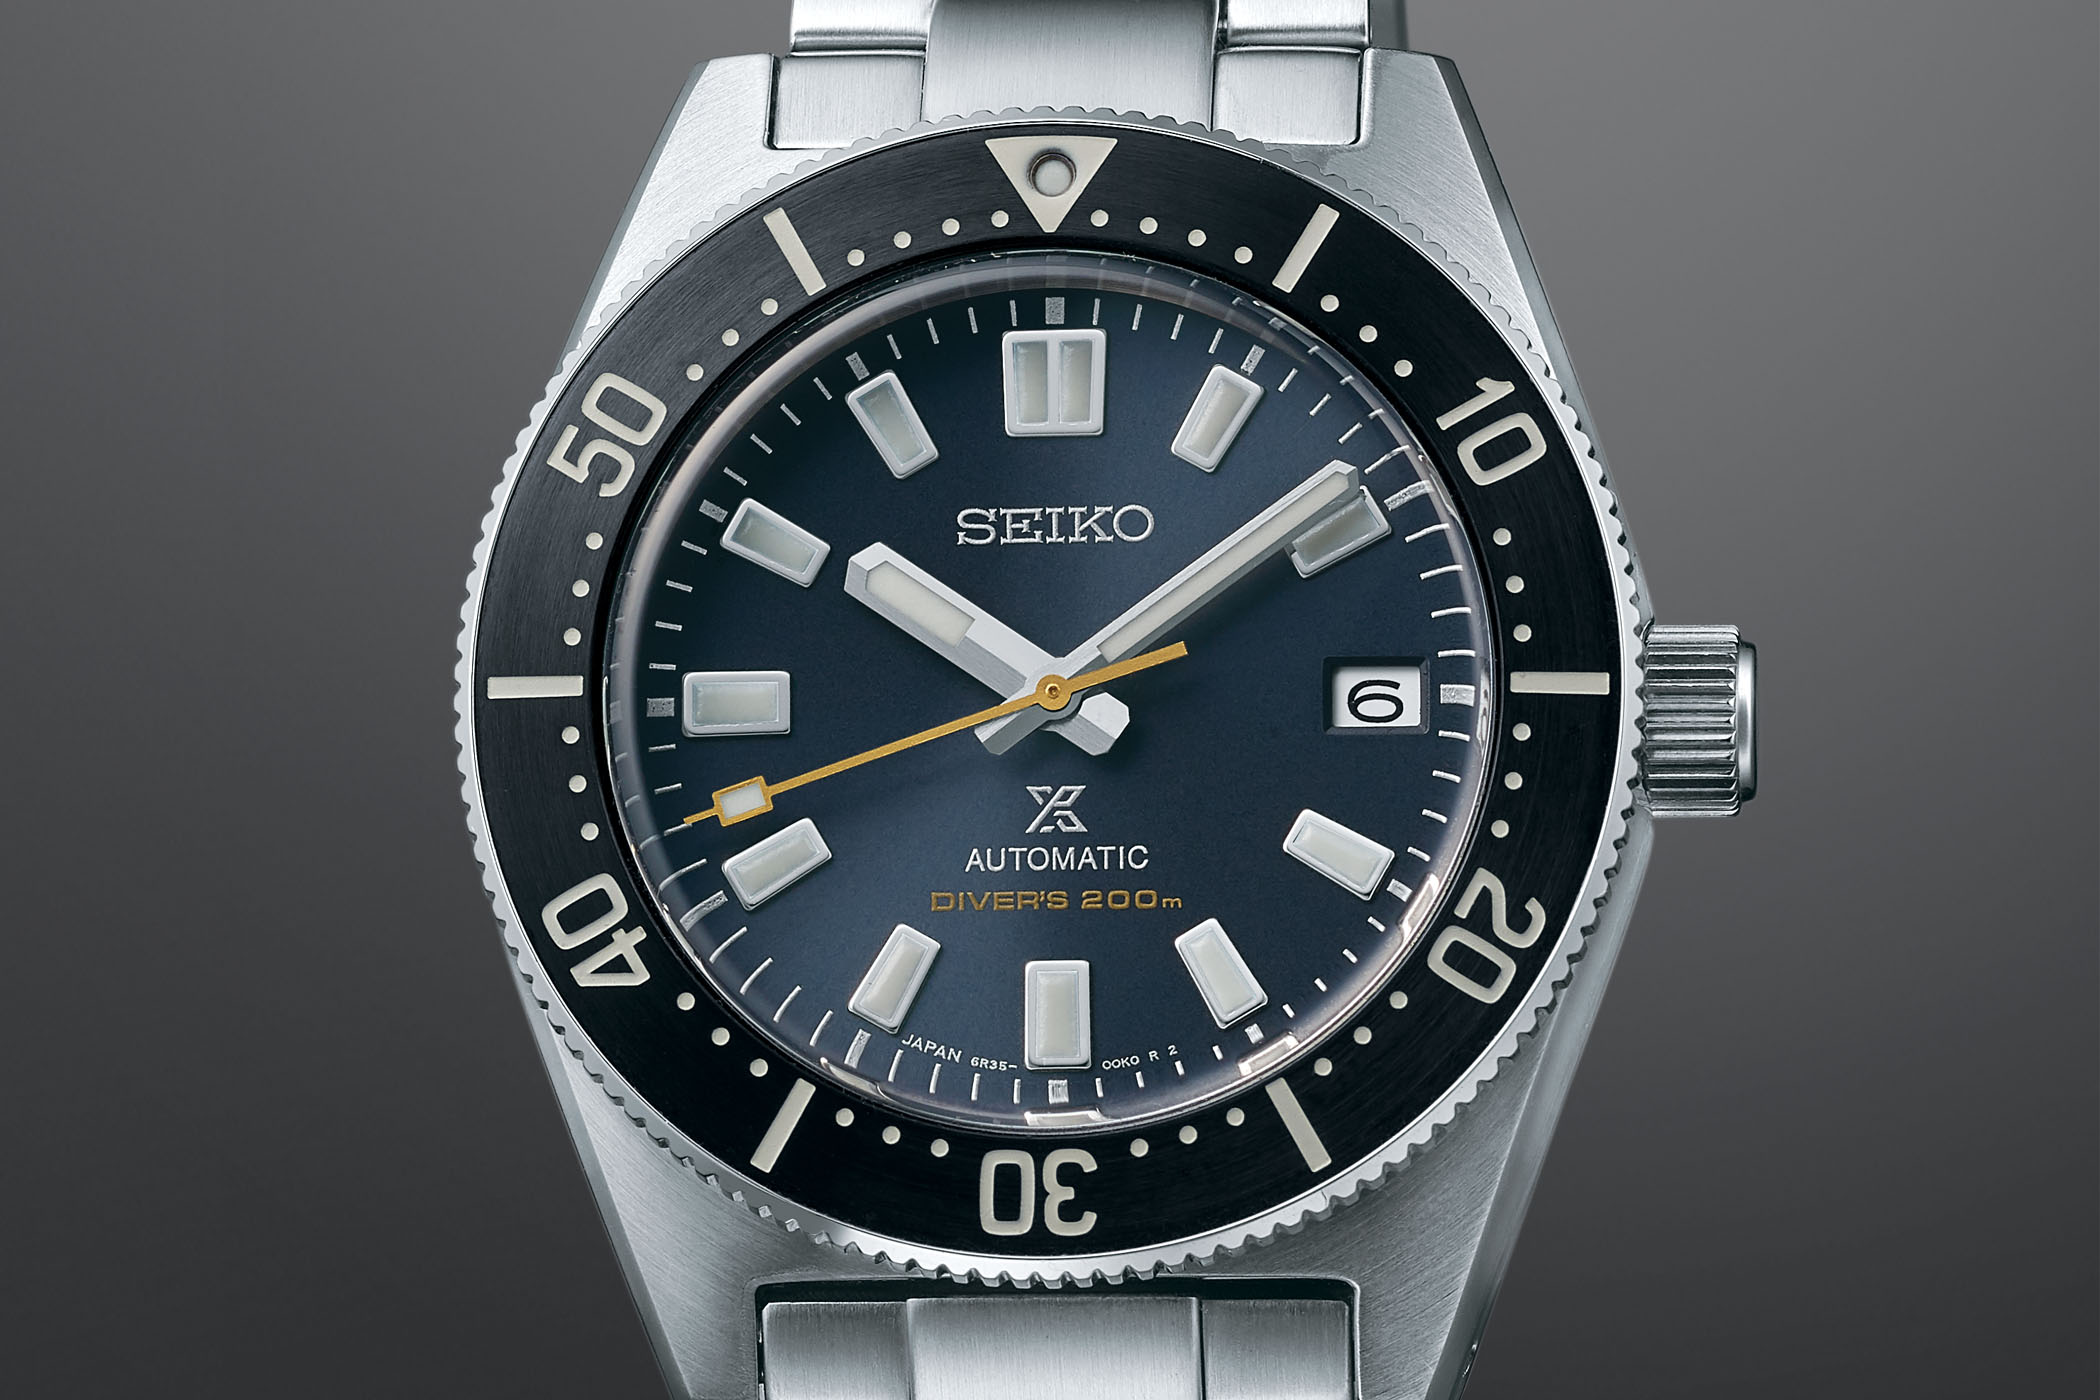 Introducing The Seiko Prospex Automatic Diver 200m SPB149 Watch